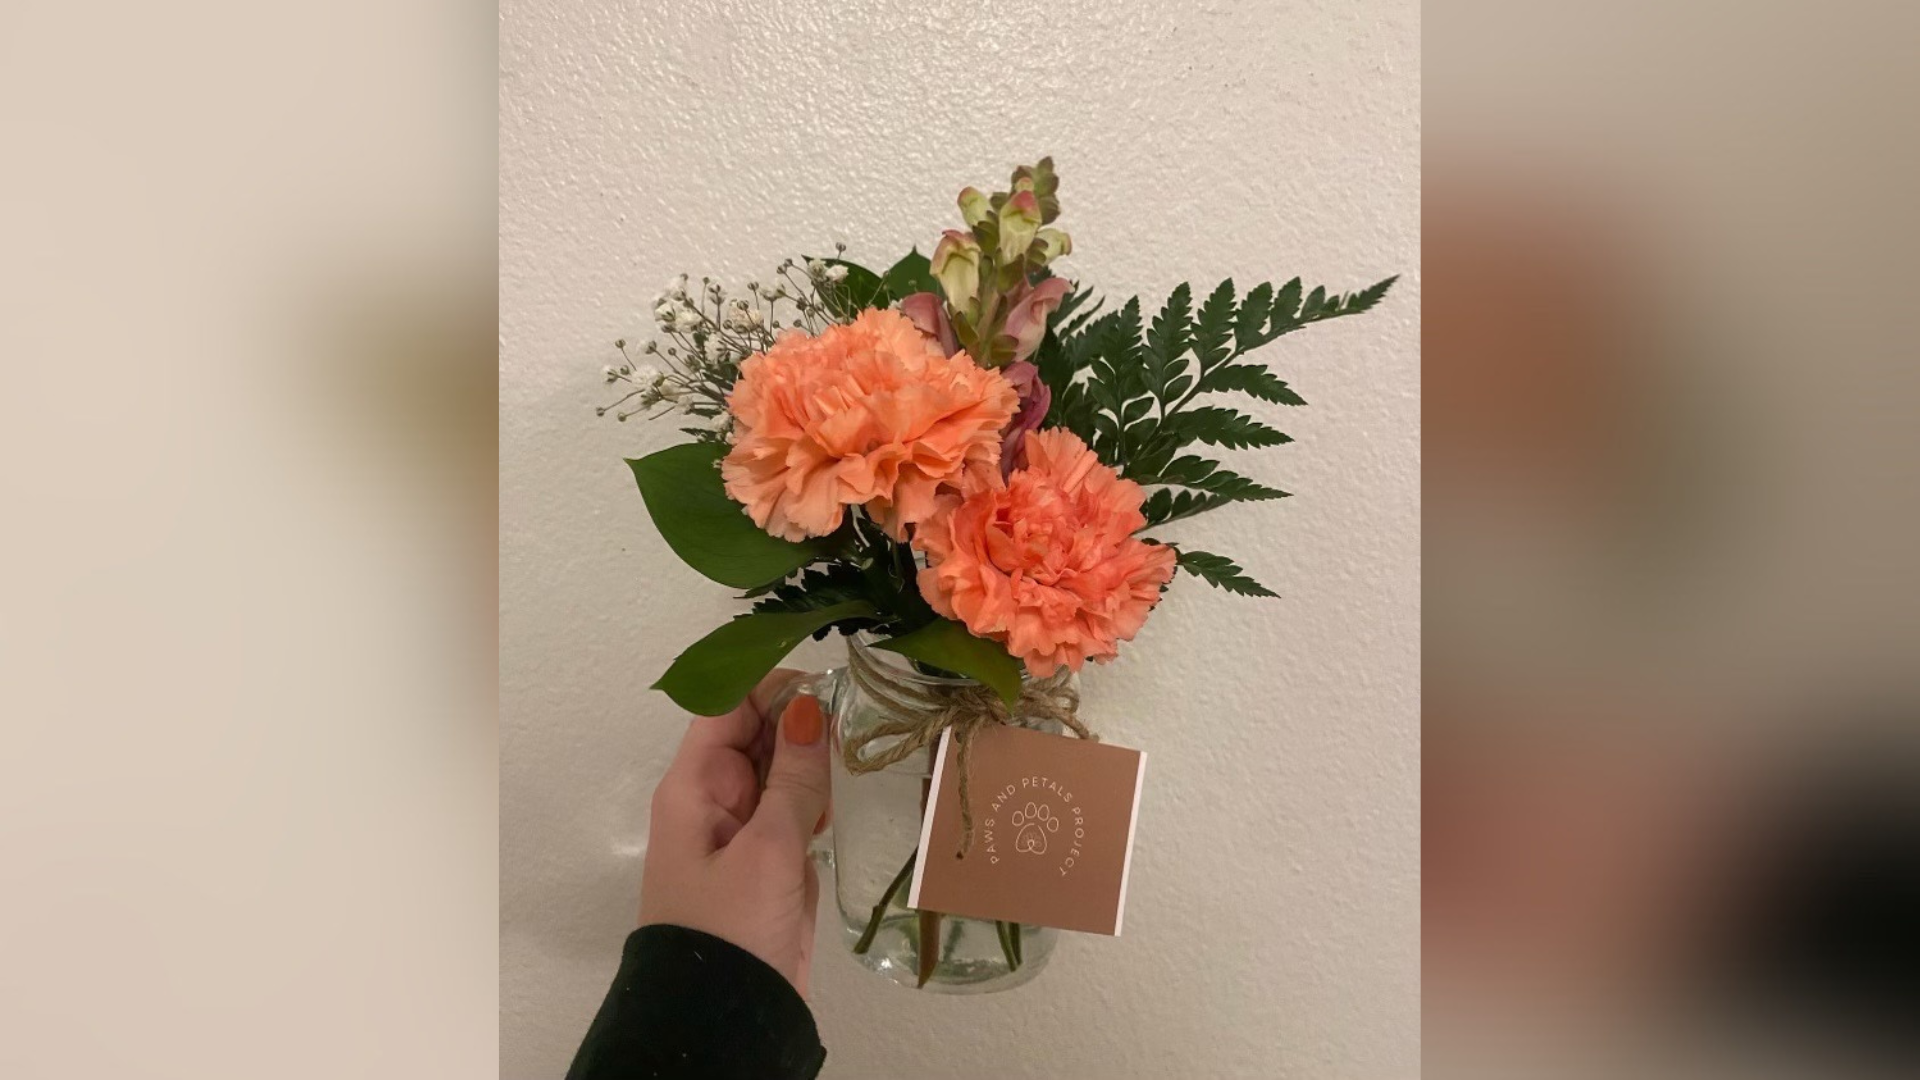 Jacelee Poll is a college student at Utah State University who puts flowers together for owners of ...